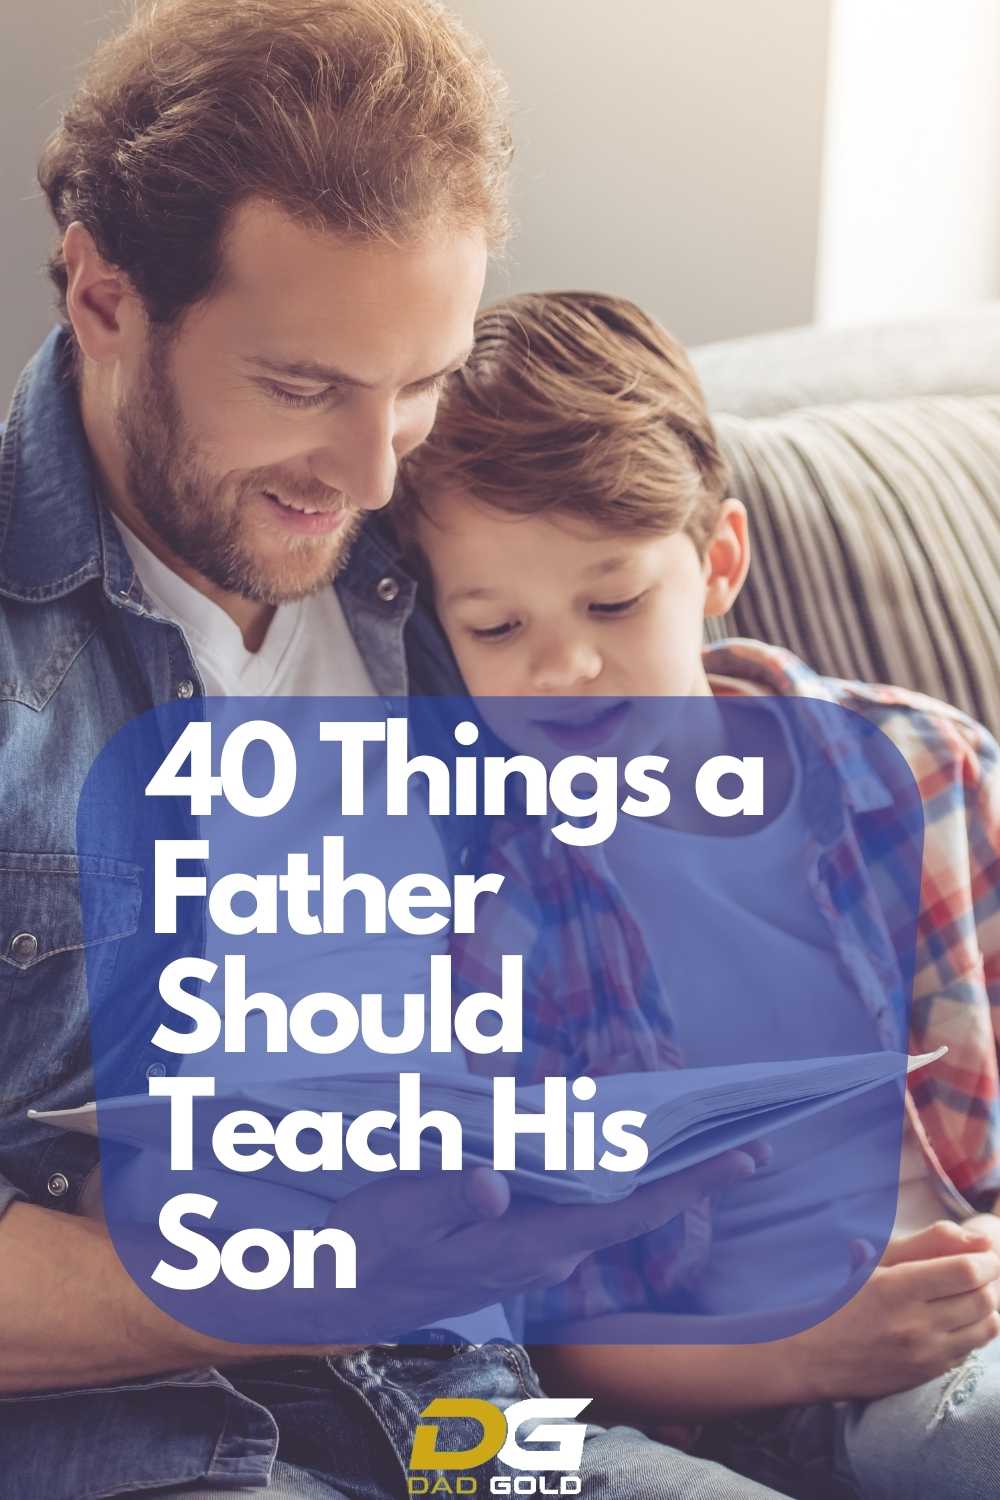 40 Things a Father Should Teach His Son